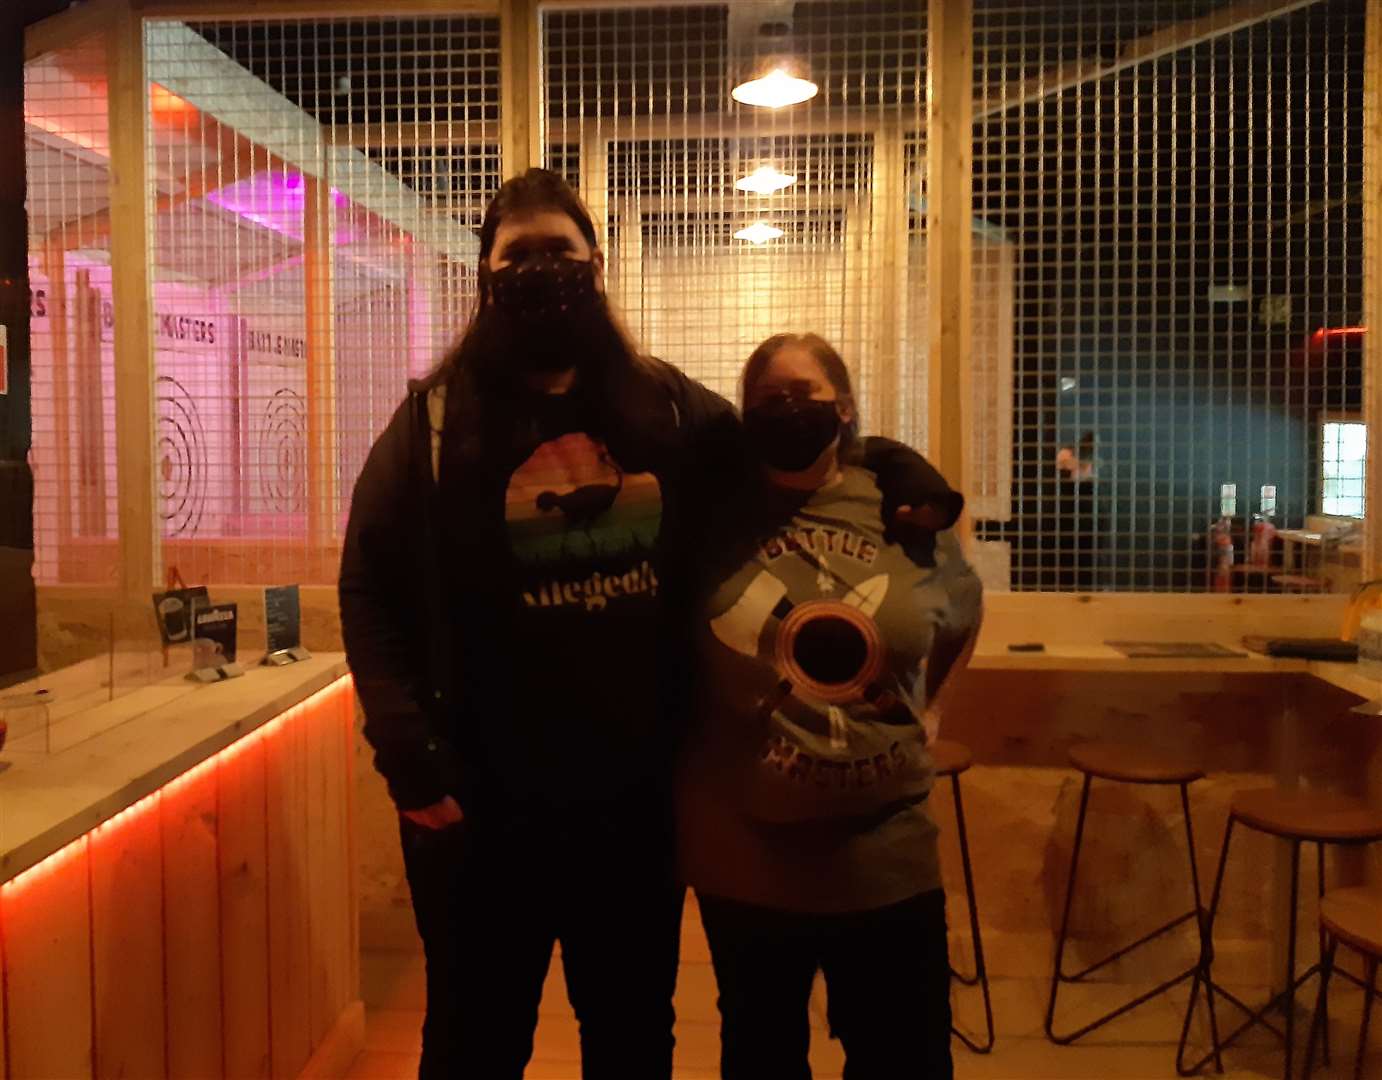 Owners of The Panic Room and Battle Masters axe throwing, Alex and Monique Souter